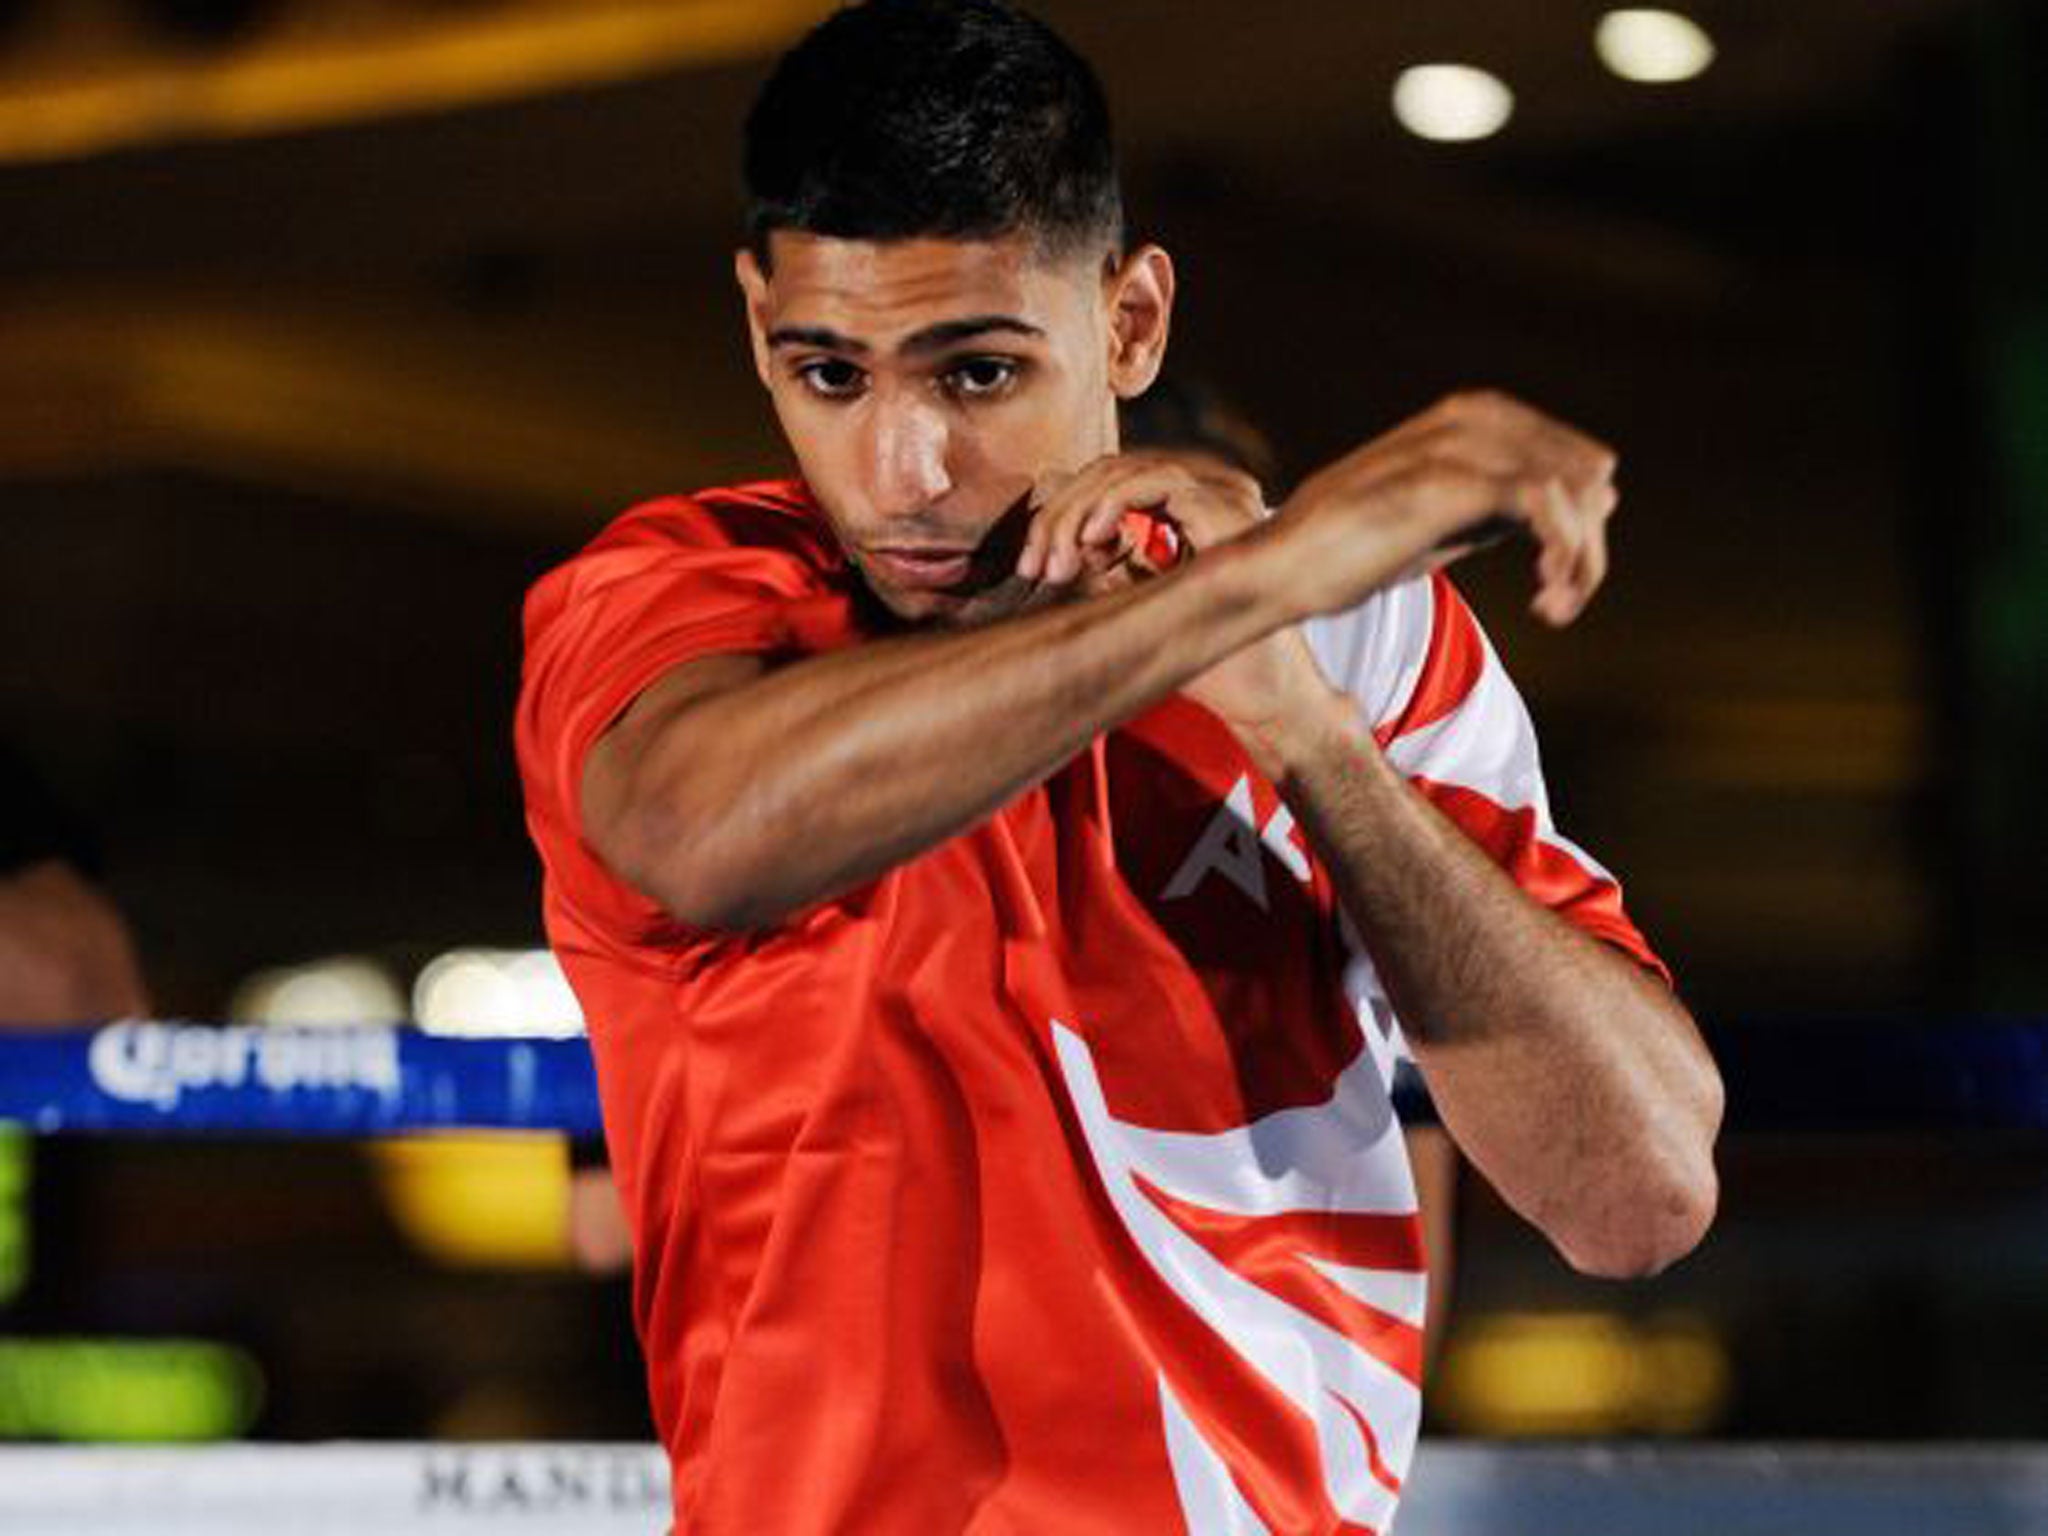 Amir Khan has been defeated three times as a pro boxer but hopes for a fresh start with new trainer Virgil Hunter